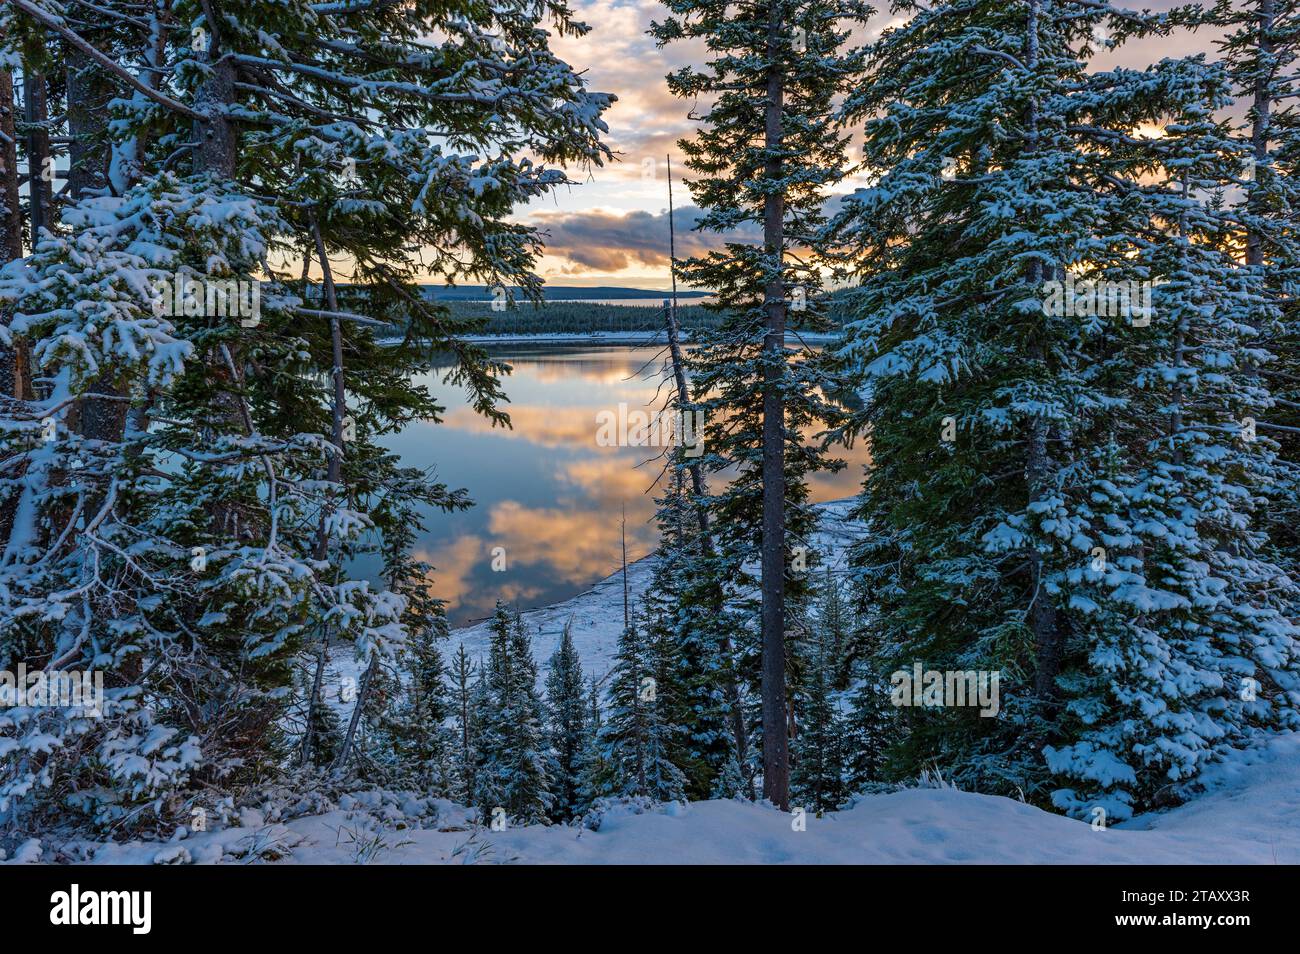 Yellowstone Lake and pine trees in snow at sunrise, Yellowstone national park, Wyoming, USA. Stock Photo